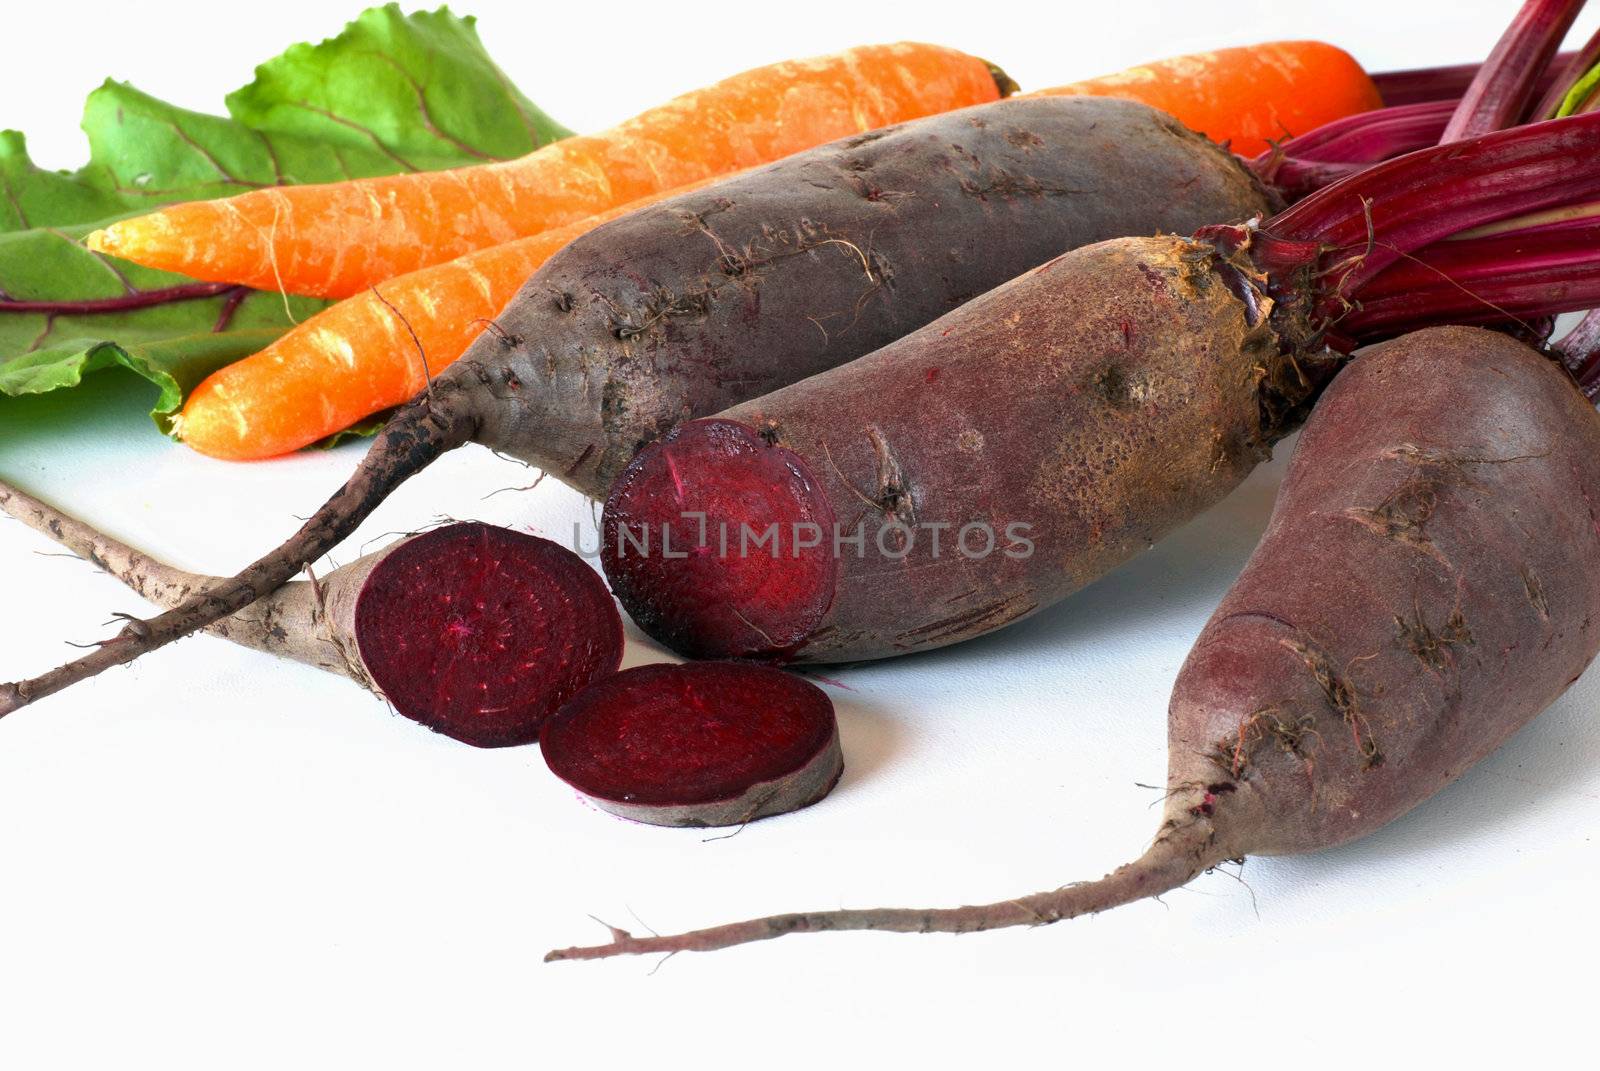 Beet by simply